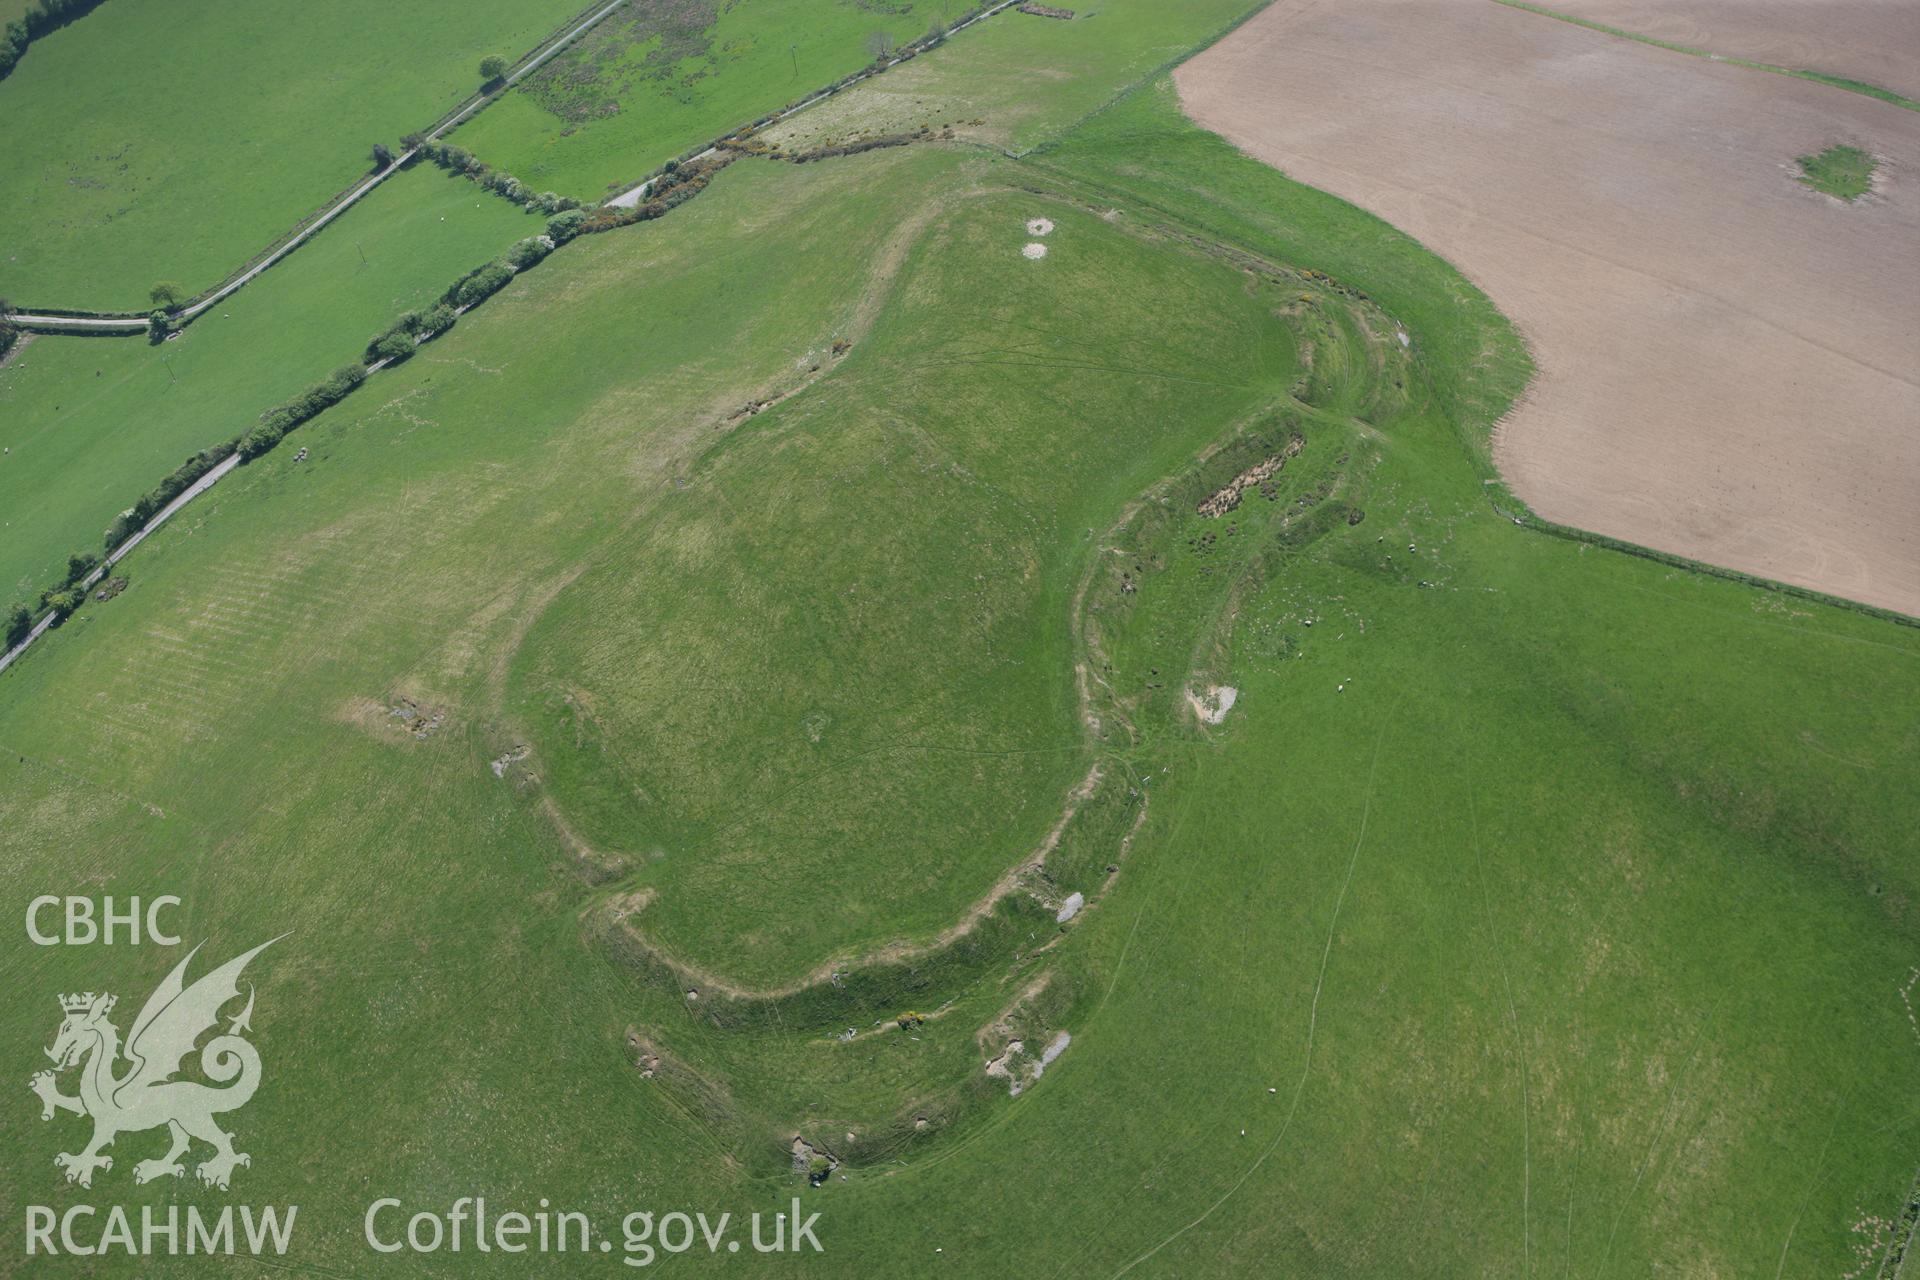 RCAHMW colour oblique photograph of Gaer Fawr hillfort,. Taken by Toby Driver on 25/05/2010.